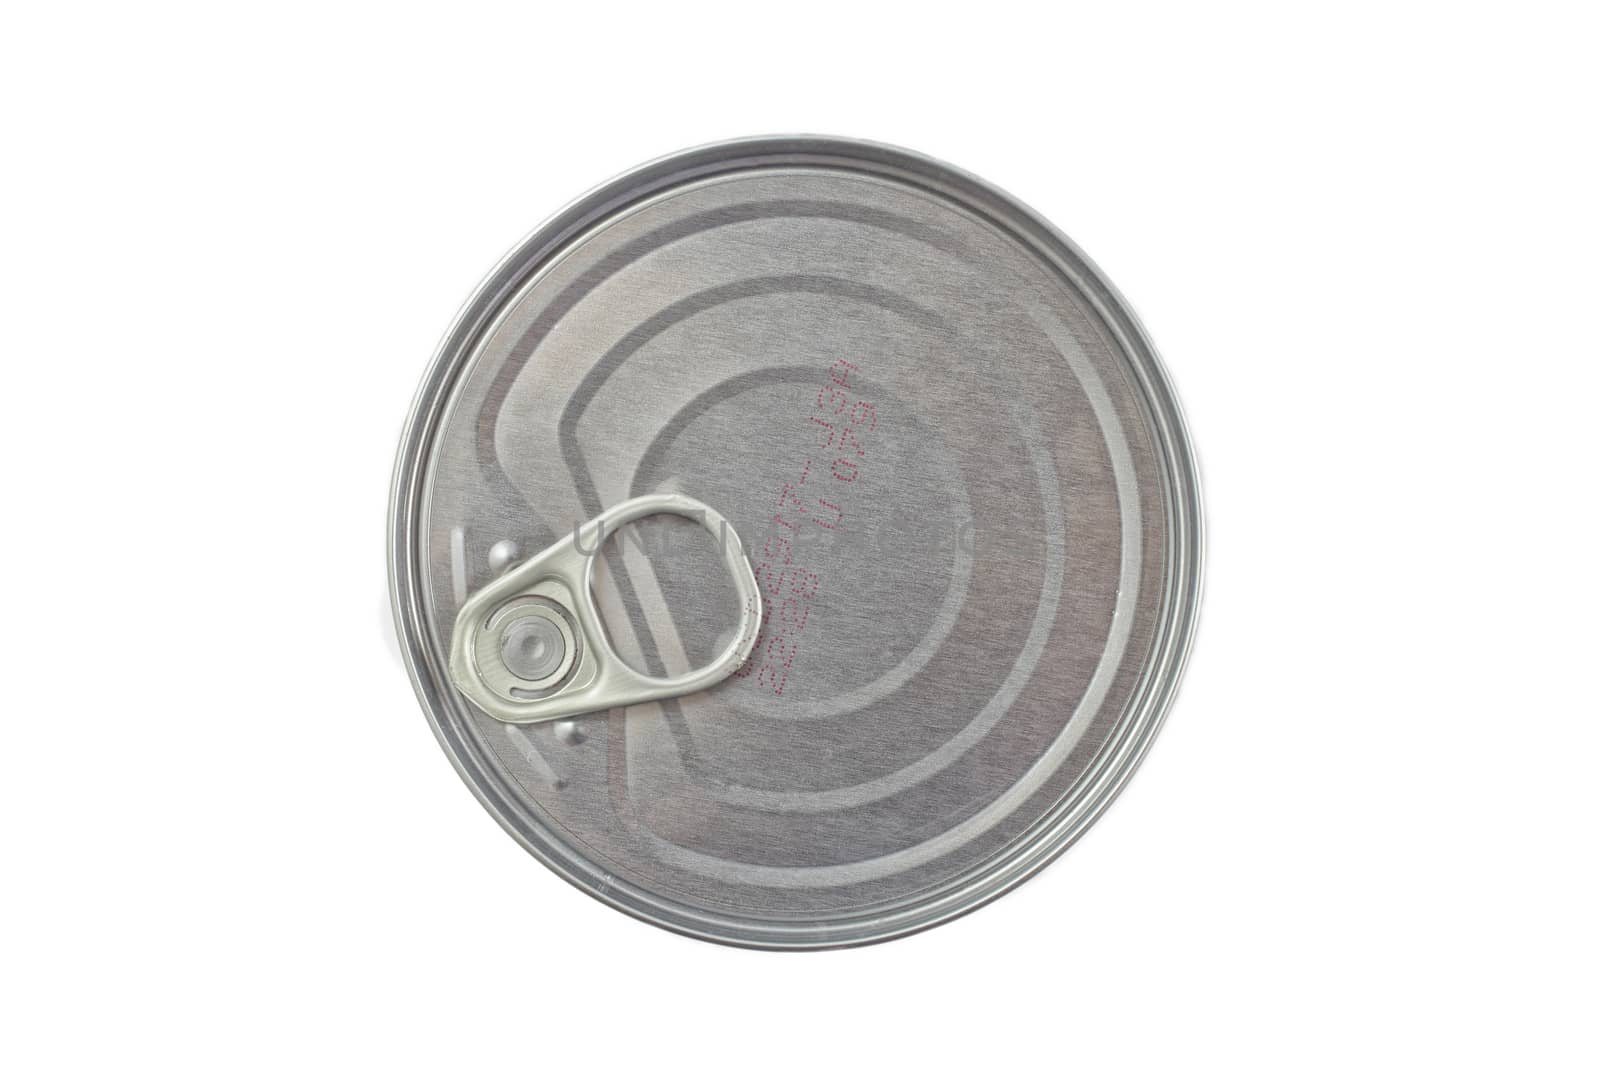 Single metal food can. Top view. Isolated on white